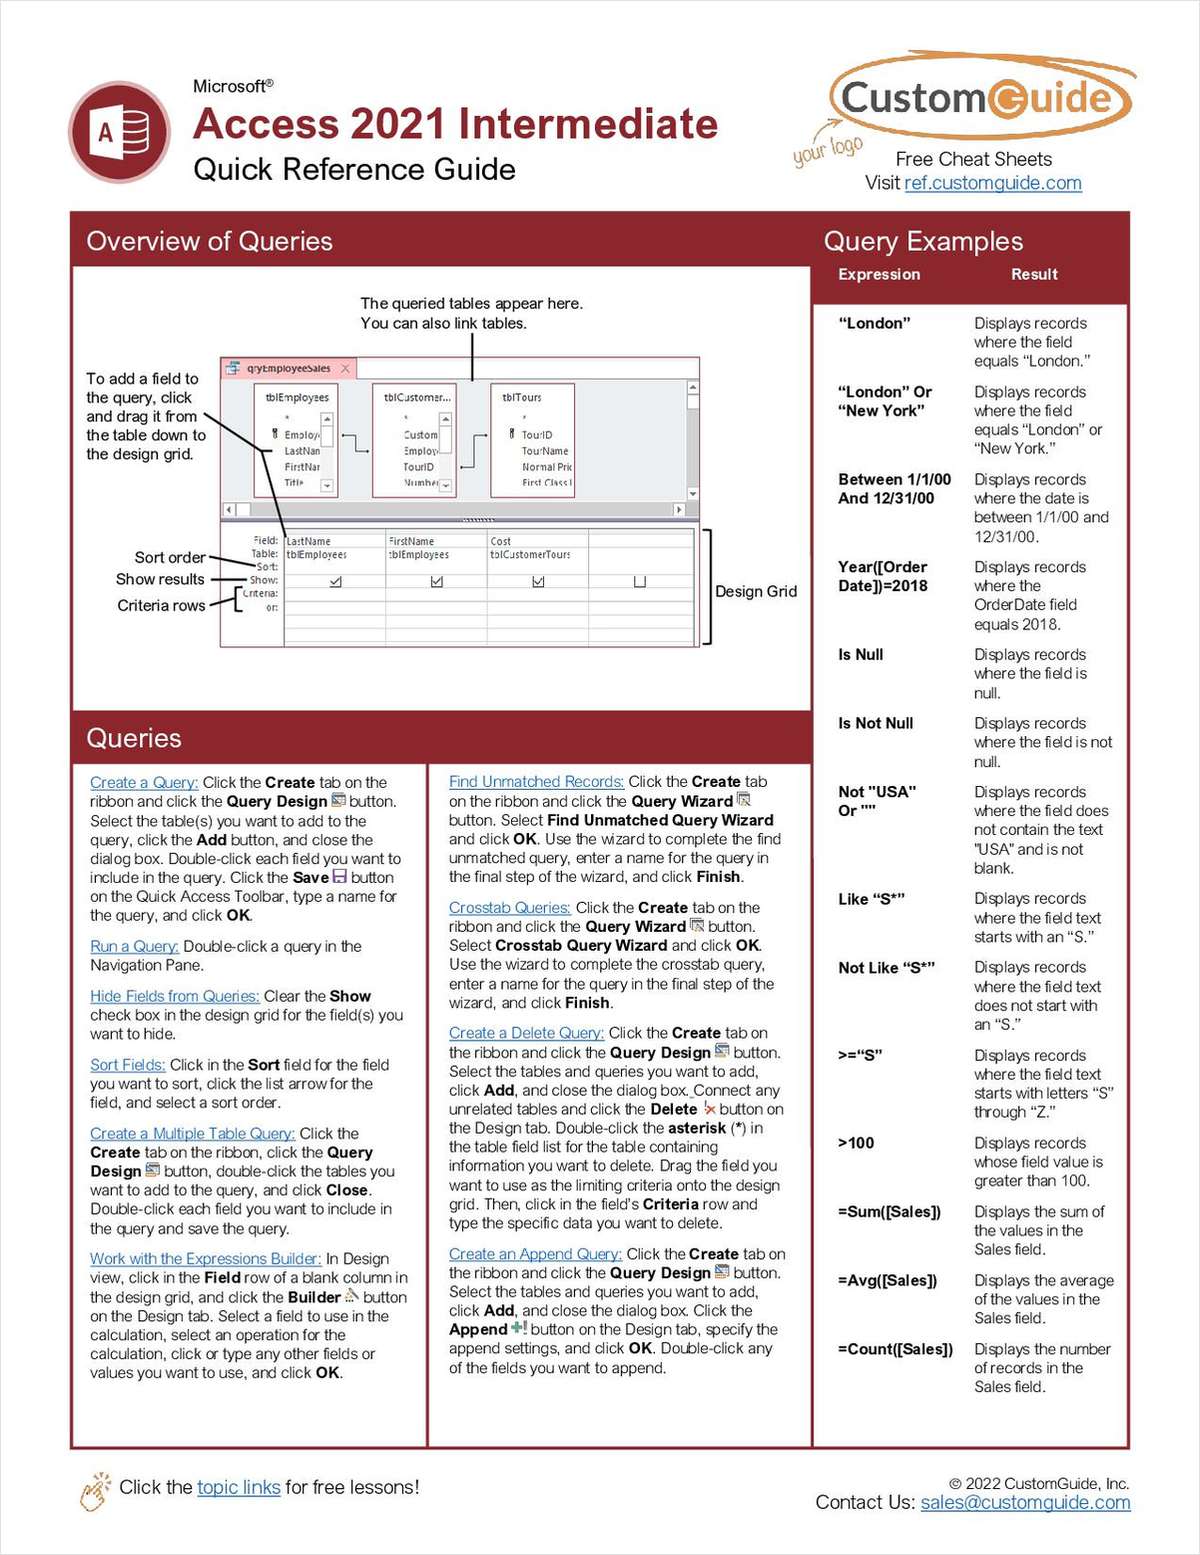 Microsoft Access 2021 Intermediate - Free Quick Reference Card